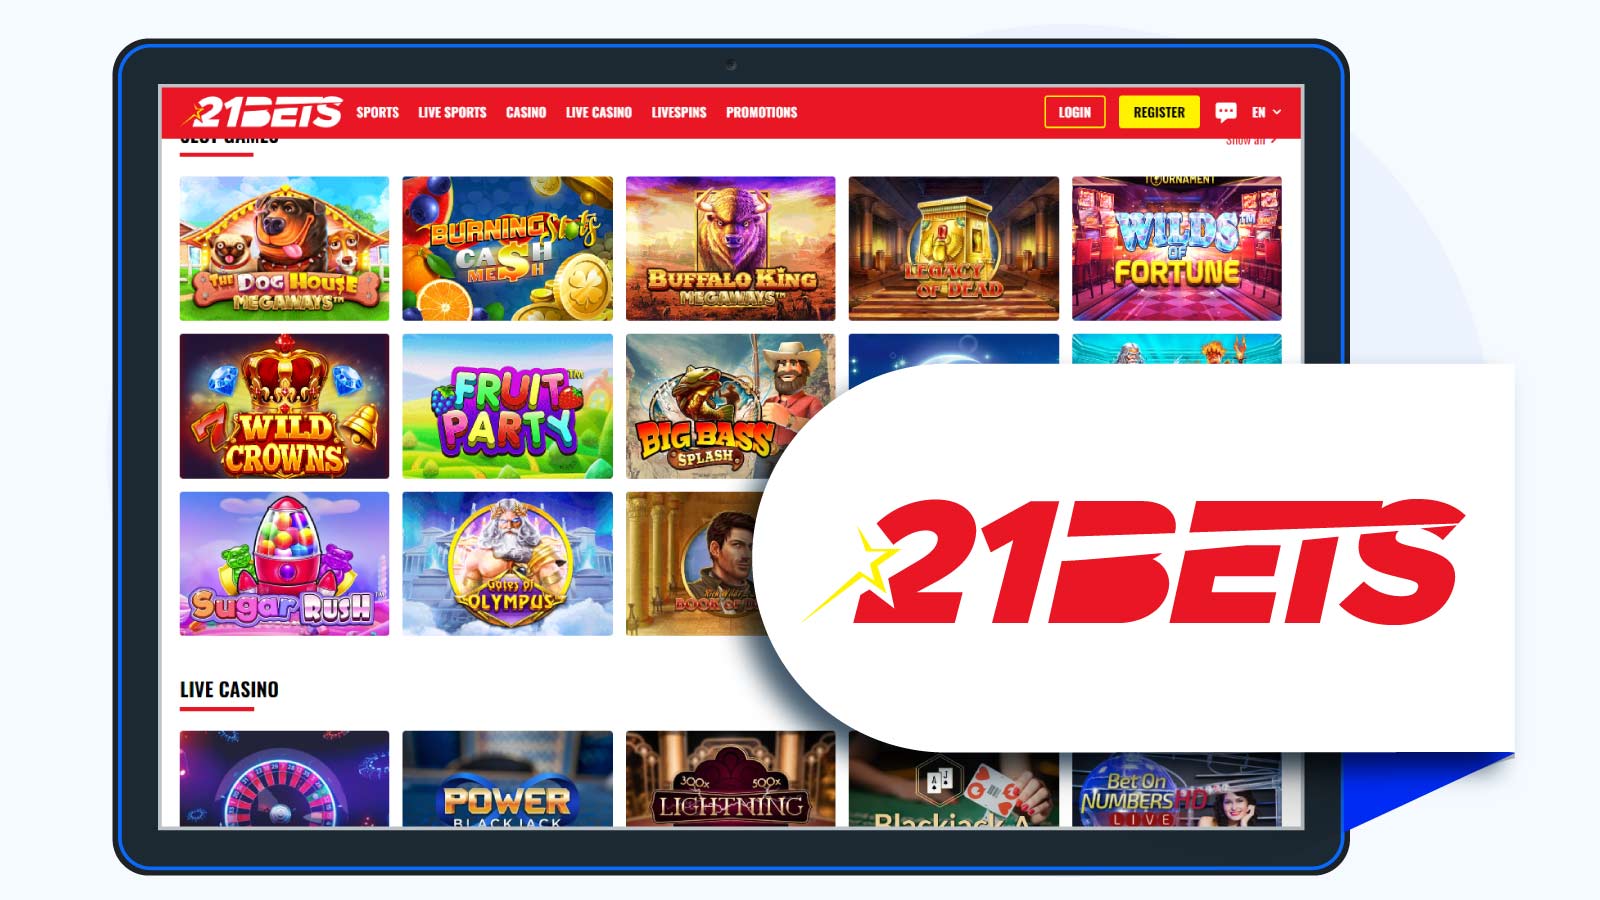 21Bets Casino Best Online Casino for Player Support